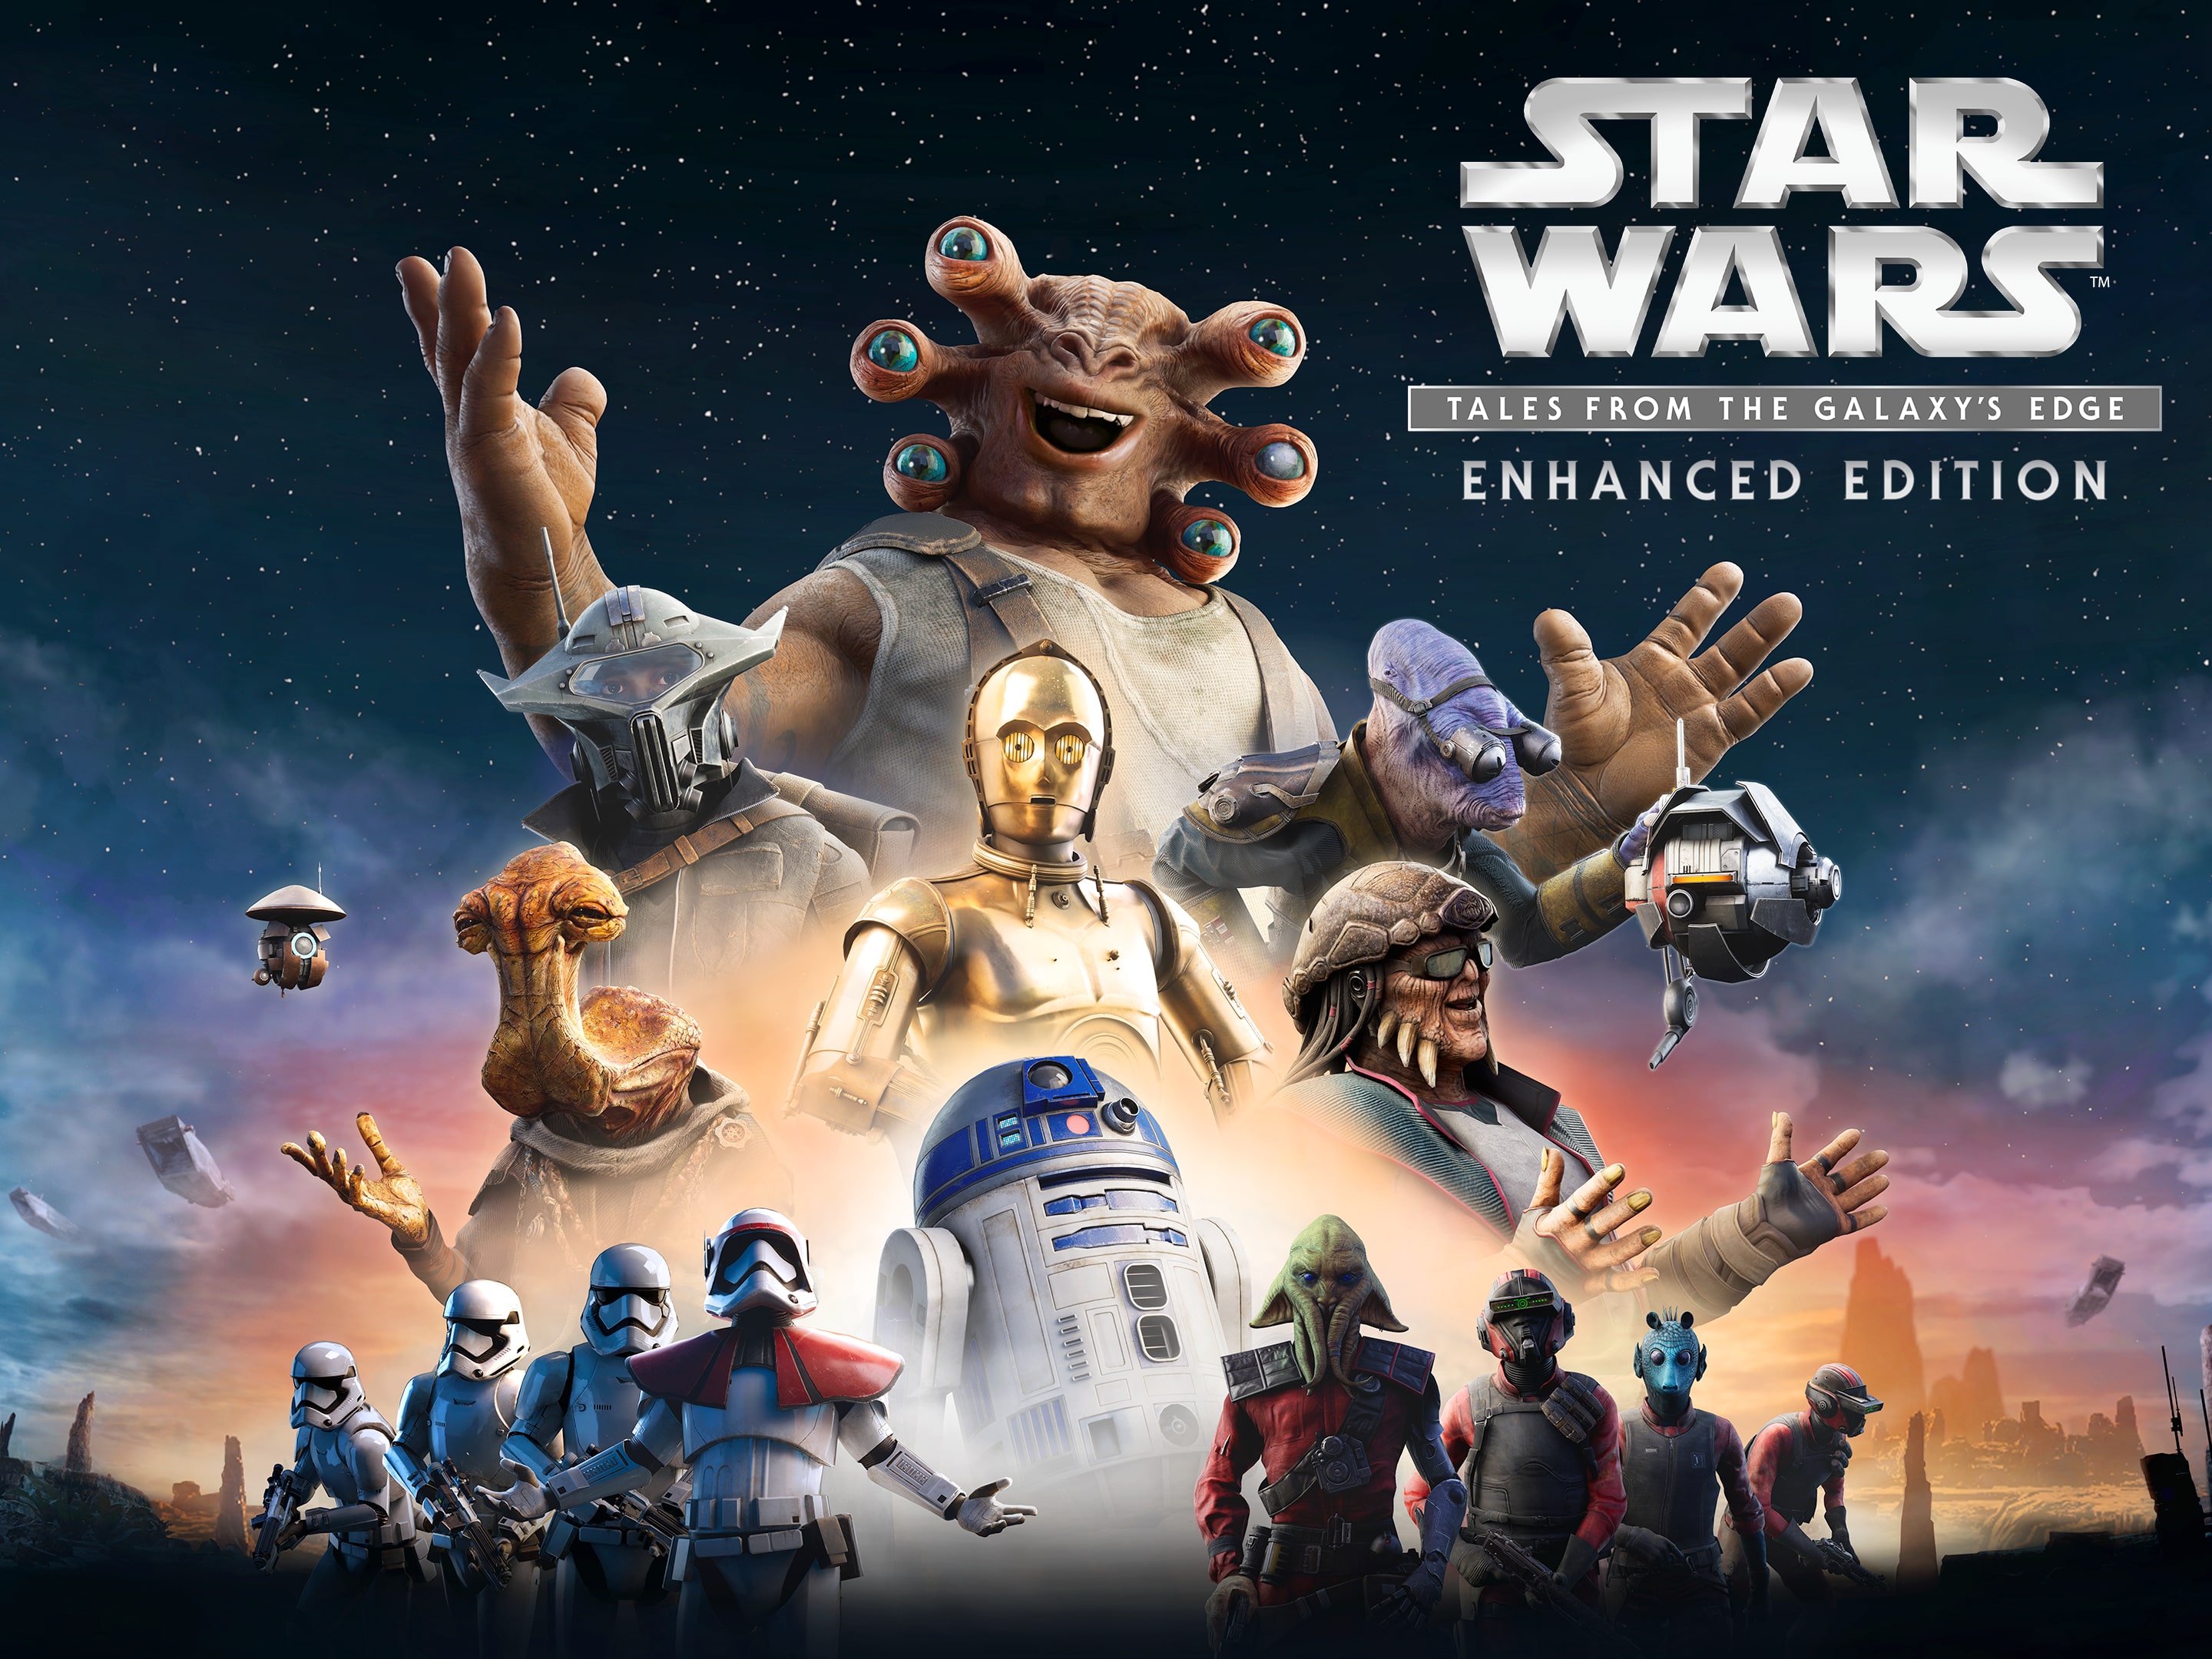 Star Wars: Tales from the Galaxy's Edge - Enhanced Edition